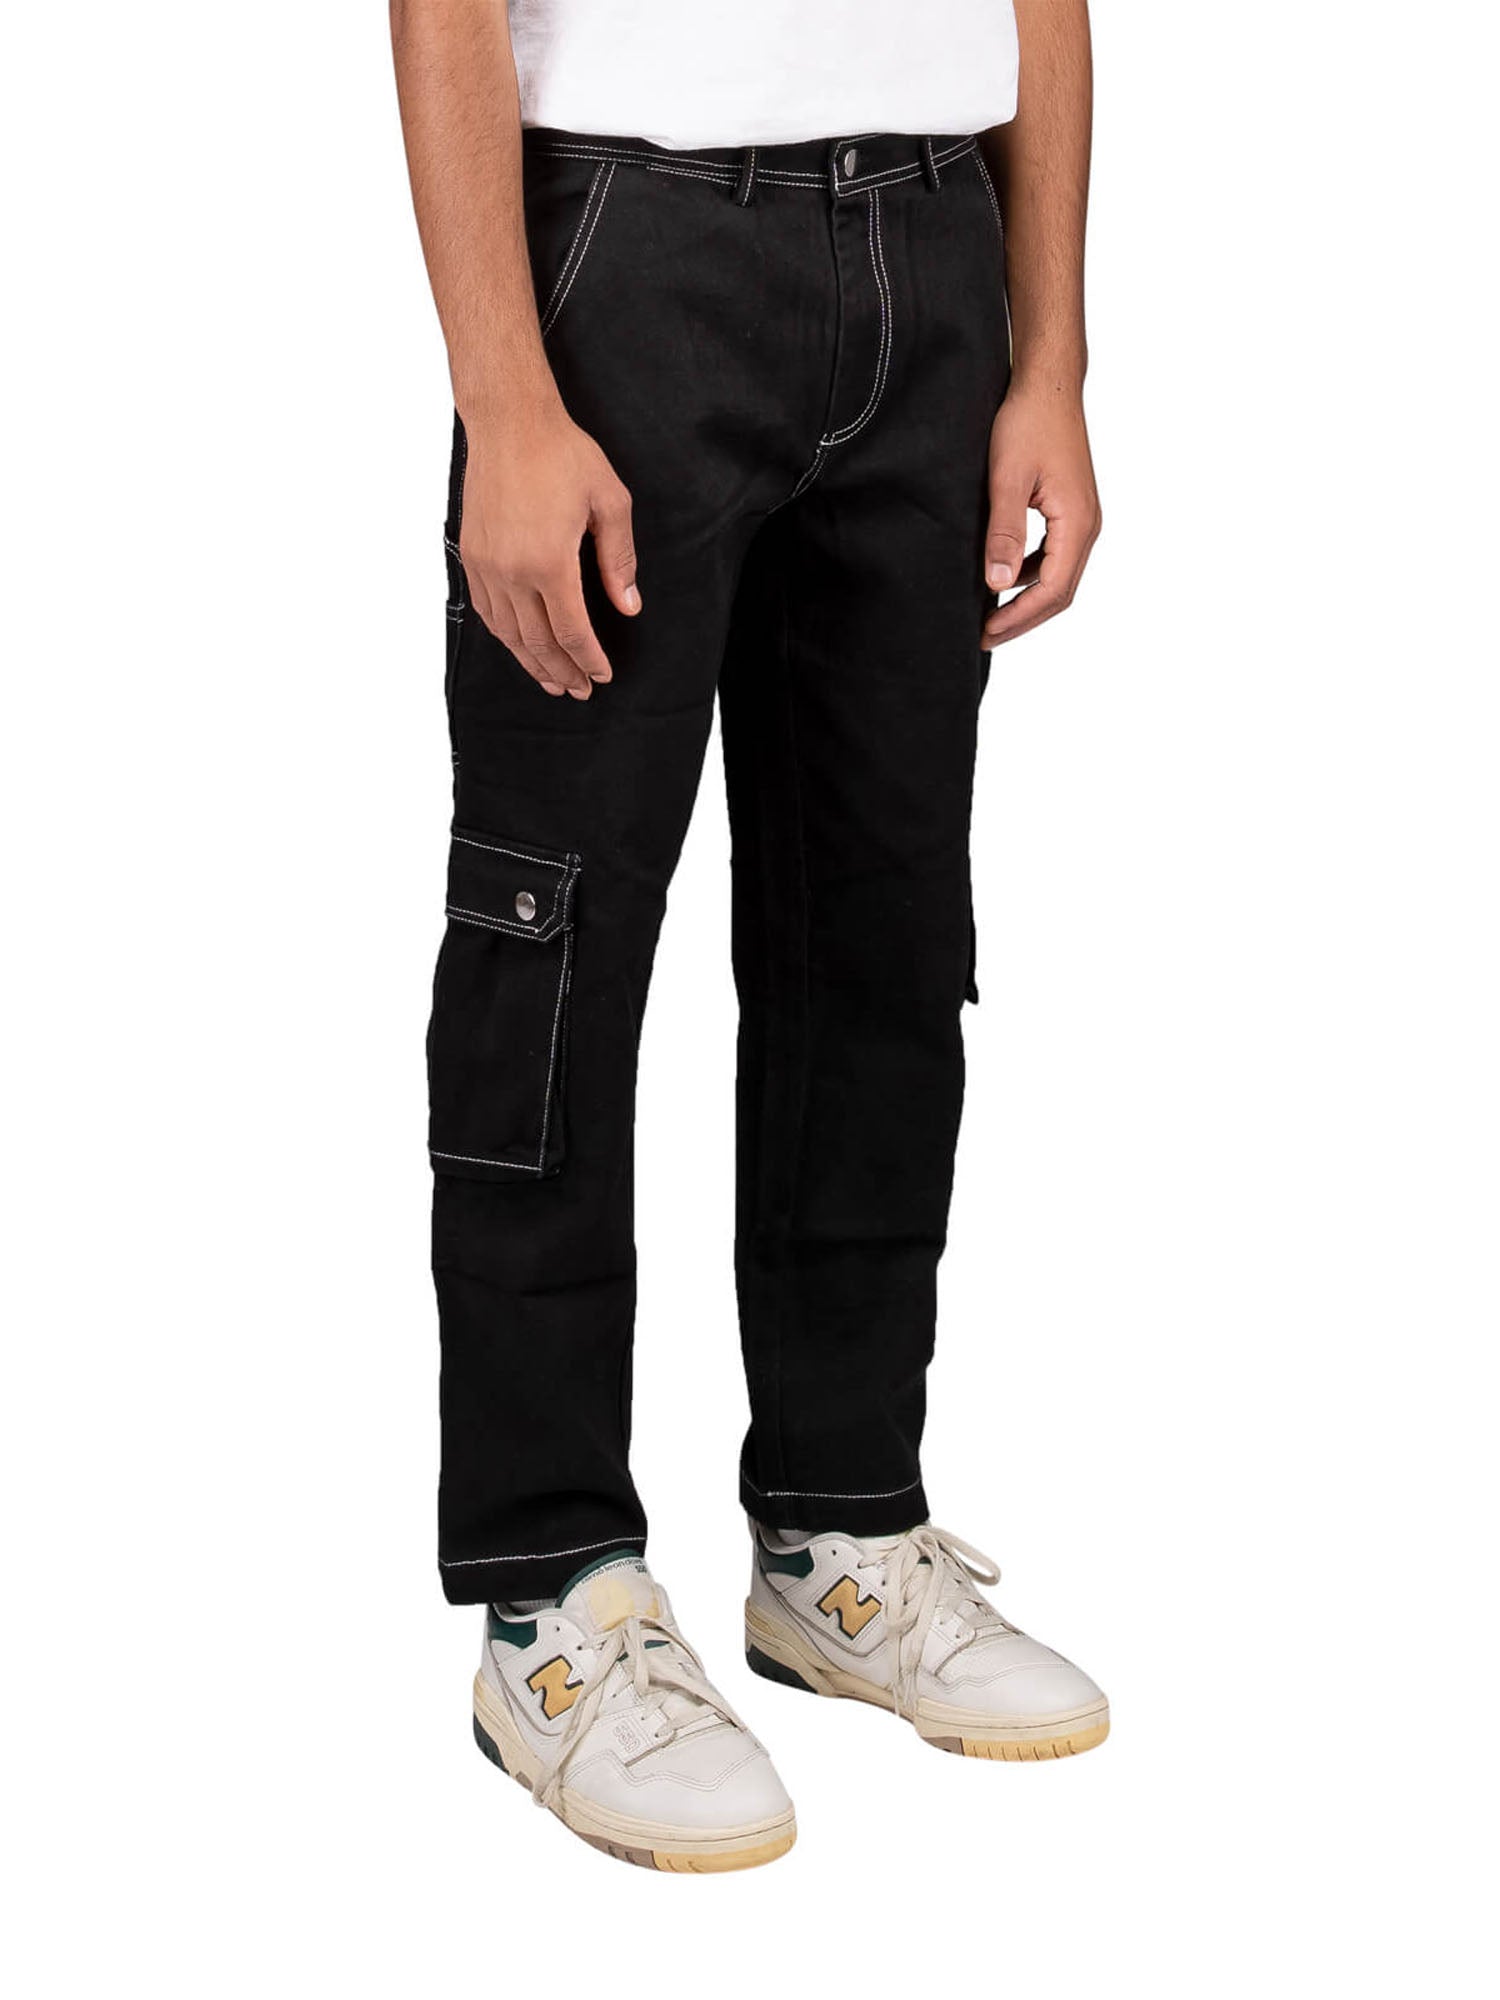 Arch - Twill Painter Cargo Pant